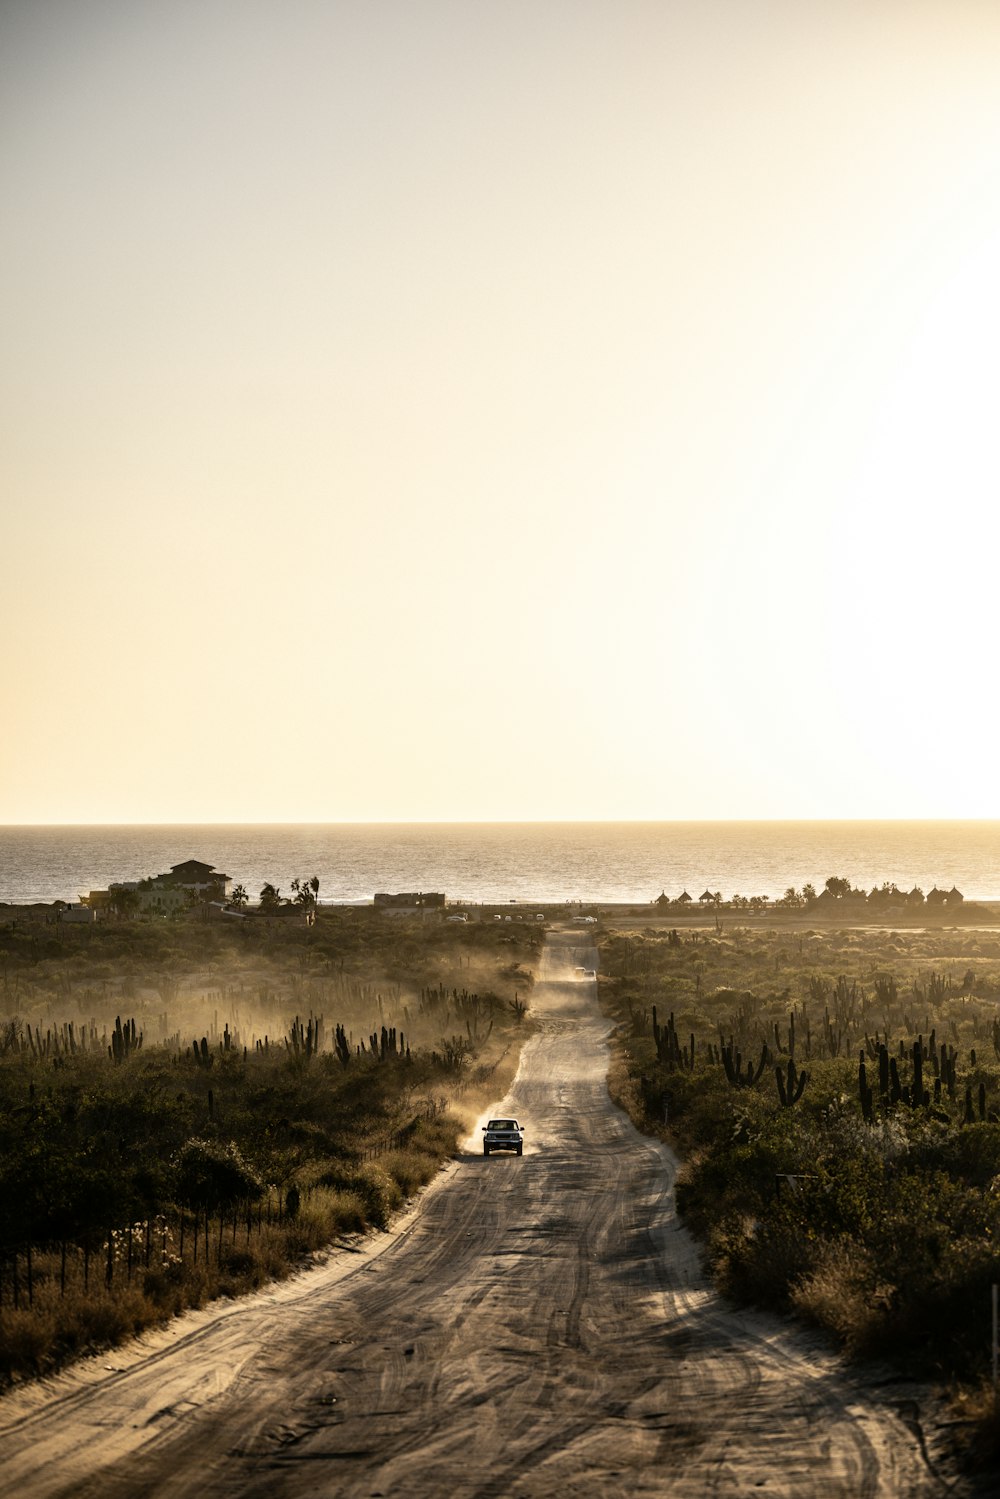 a dirt road with a car on it by a beach